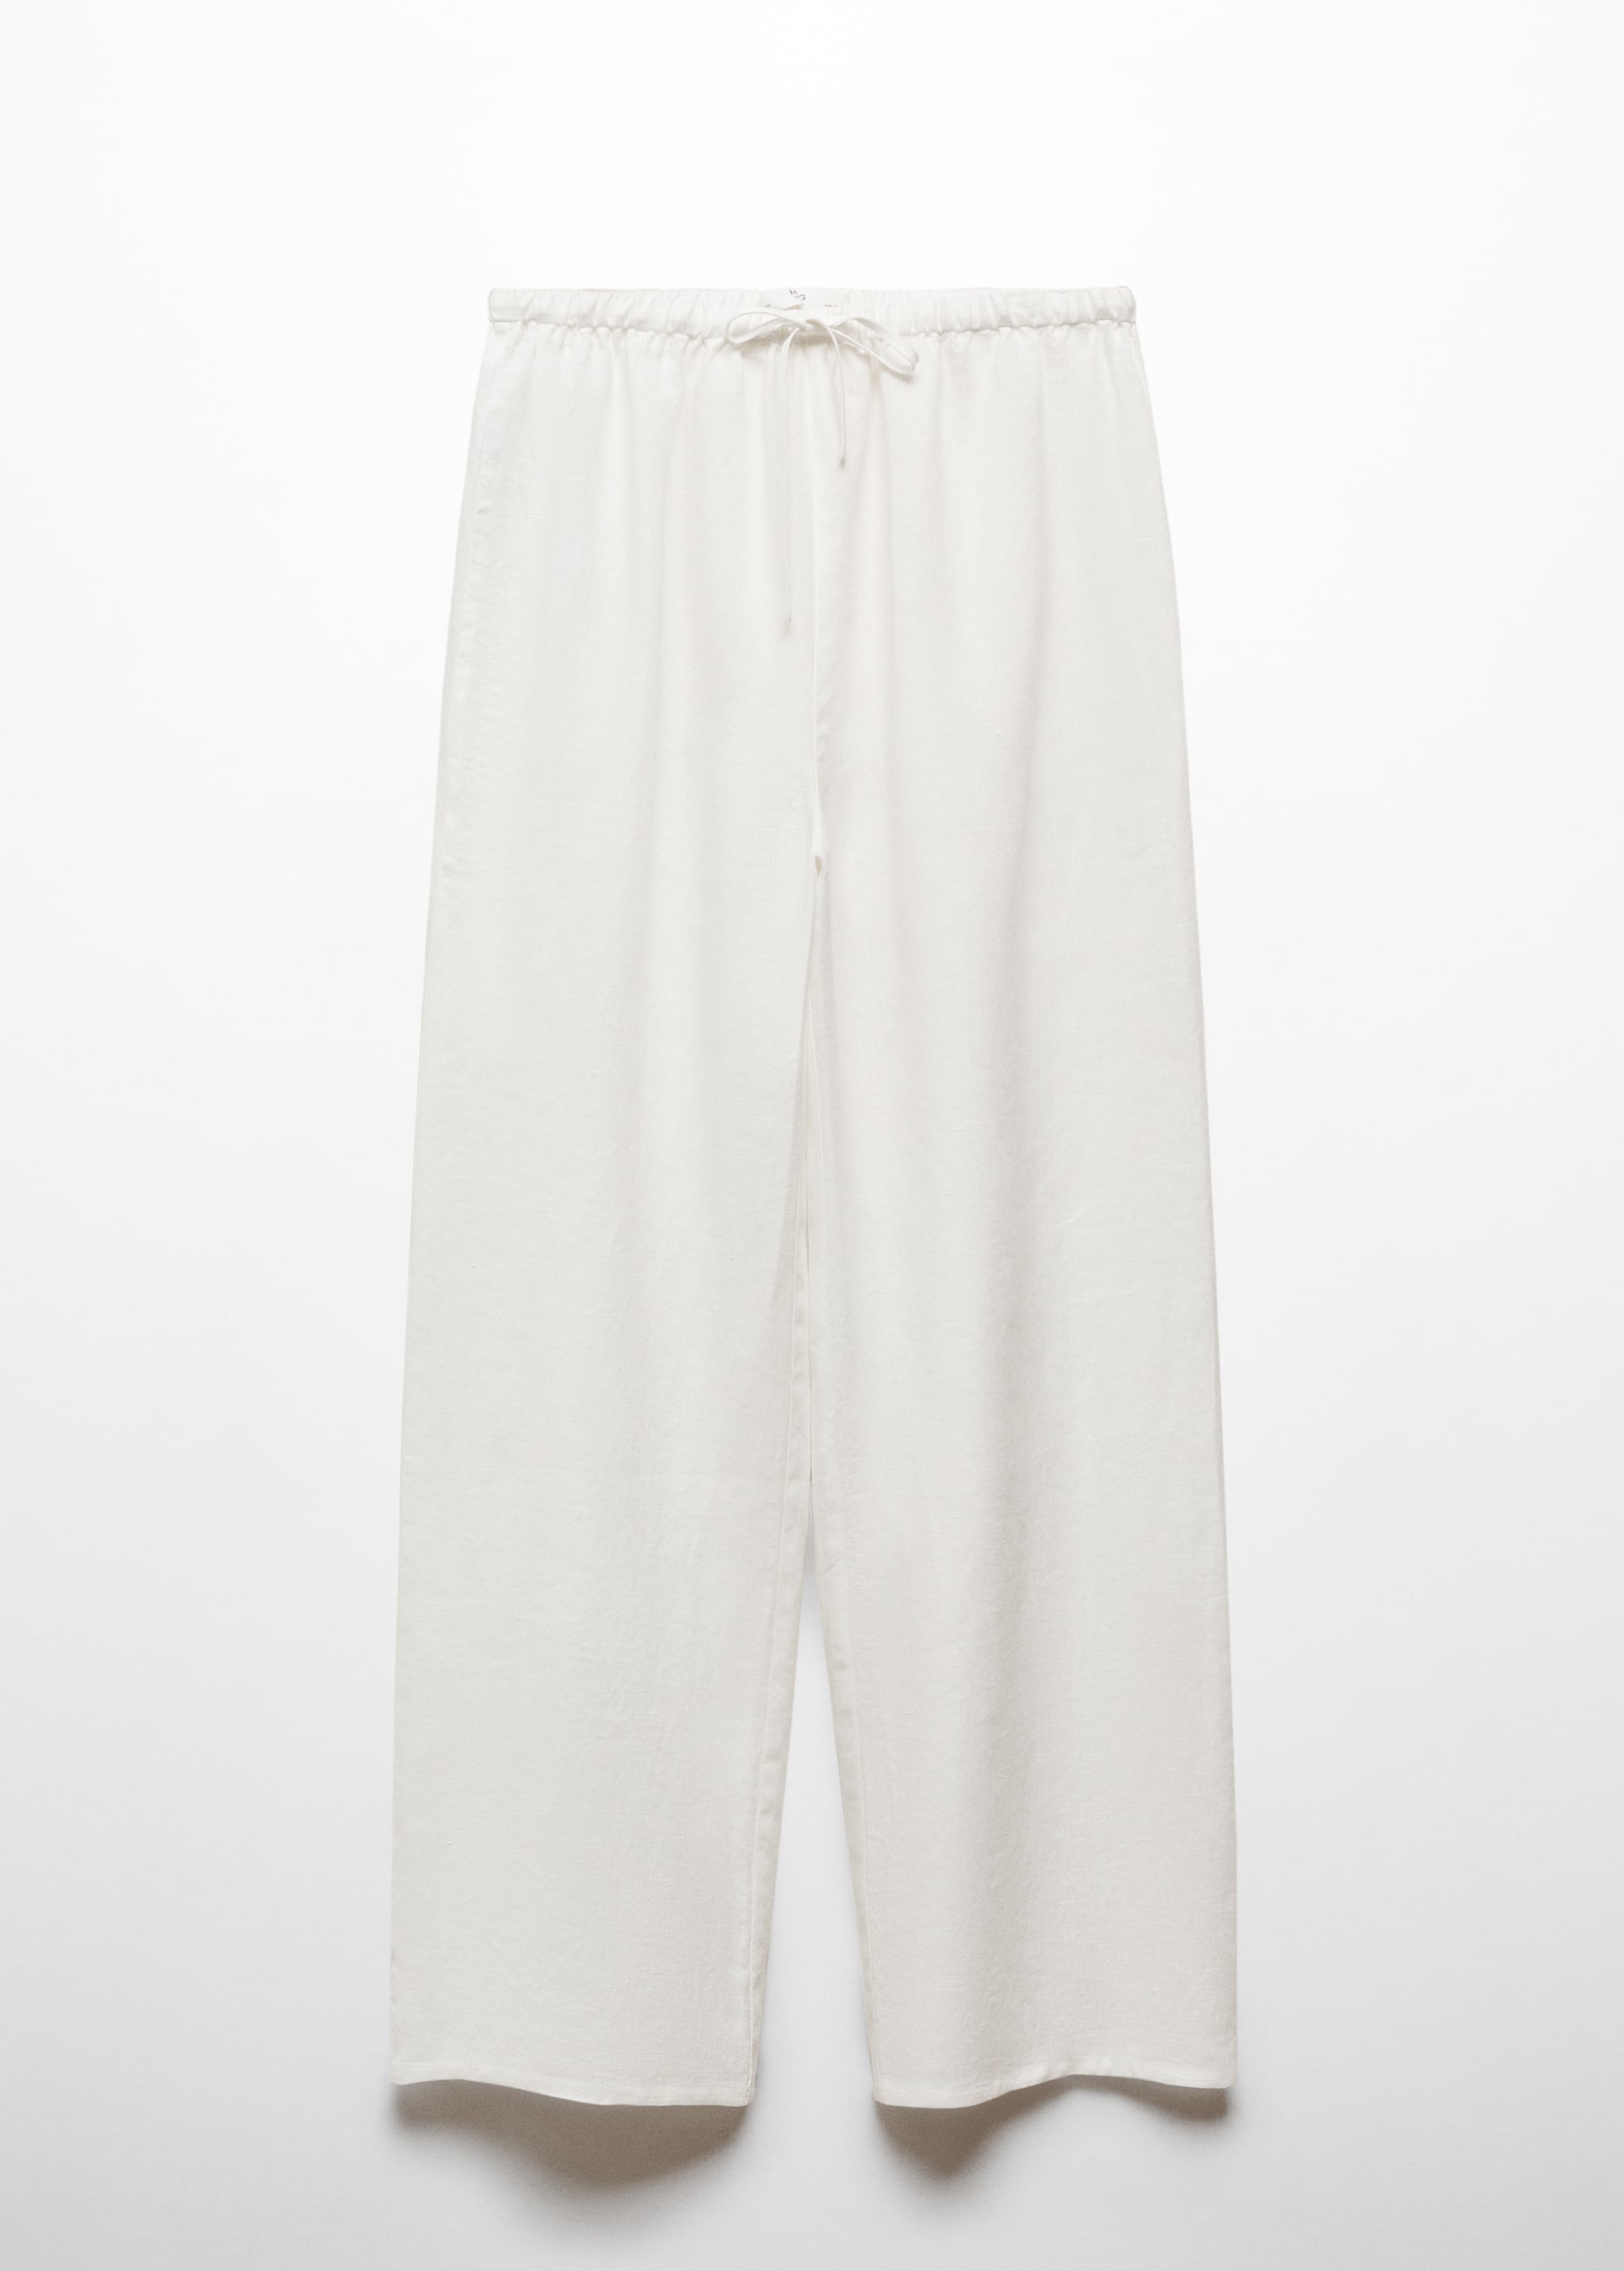 100% linen pyjama trousers - Article without model